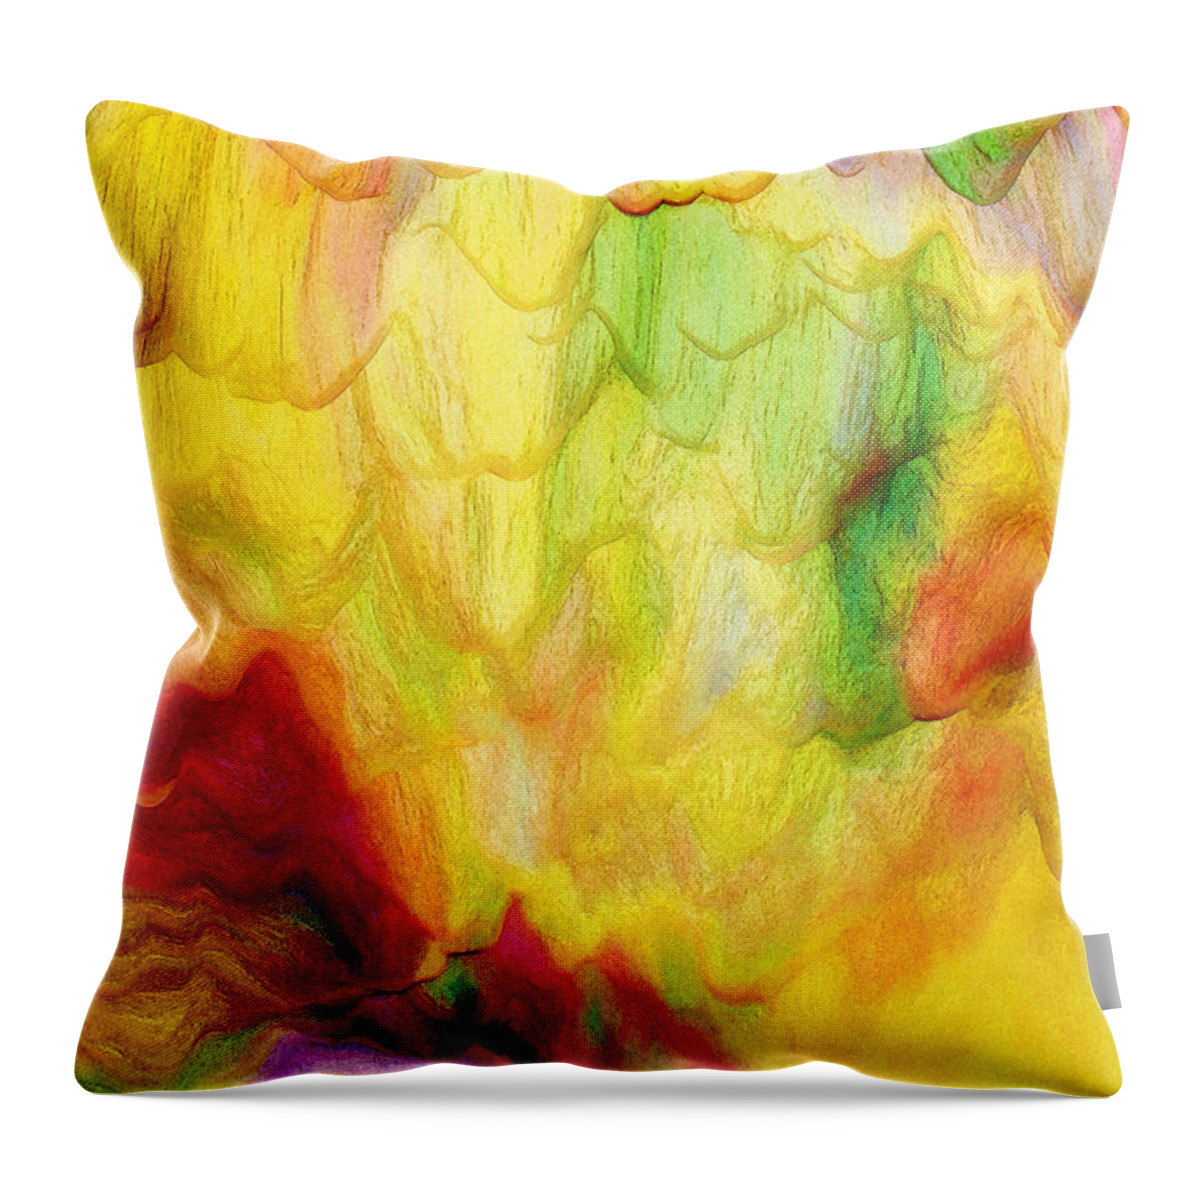 Digital Abstract Throw Pillow featuring the digital art Spring Two 030216 by Matthew Lindley